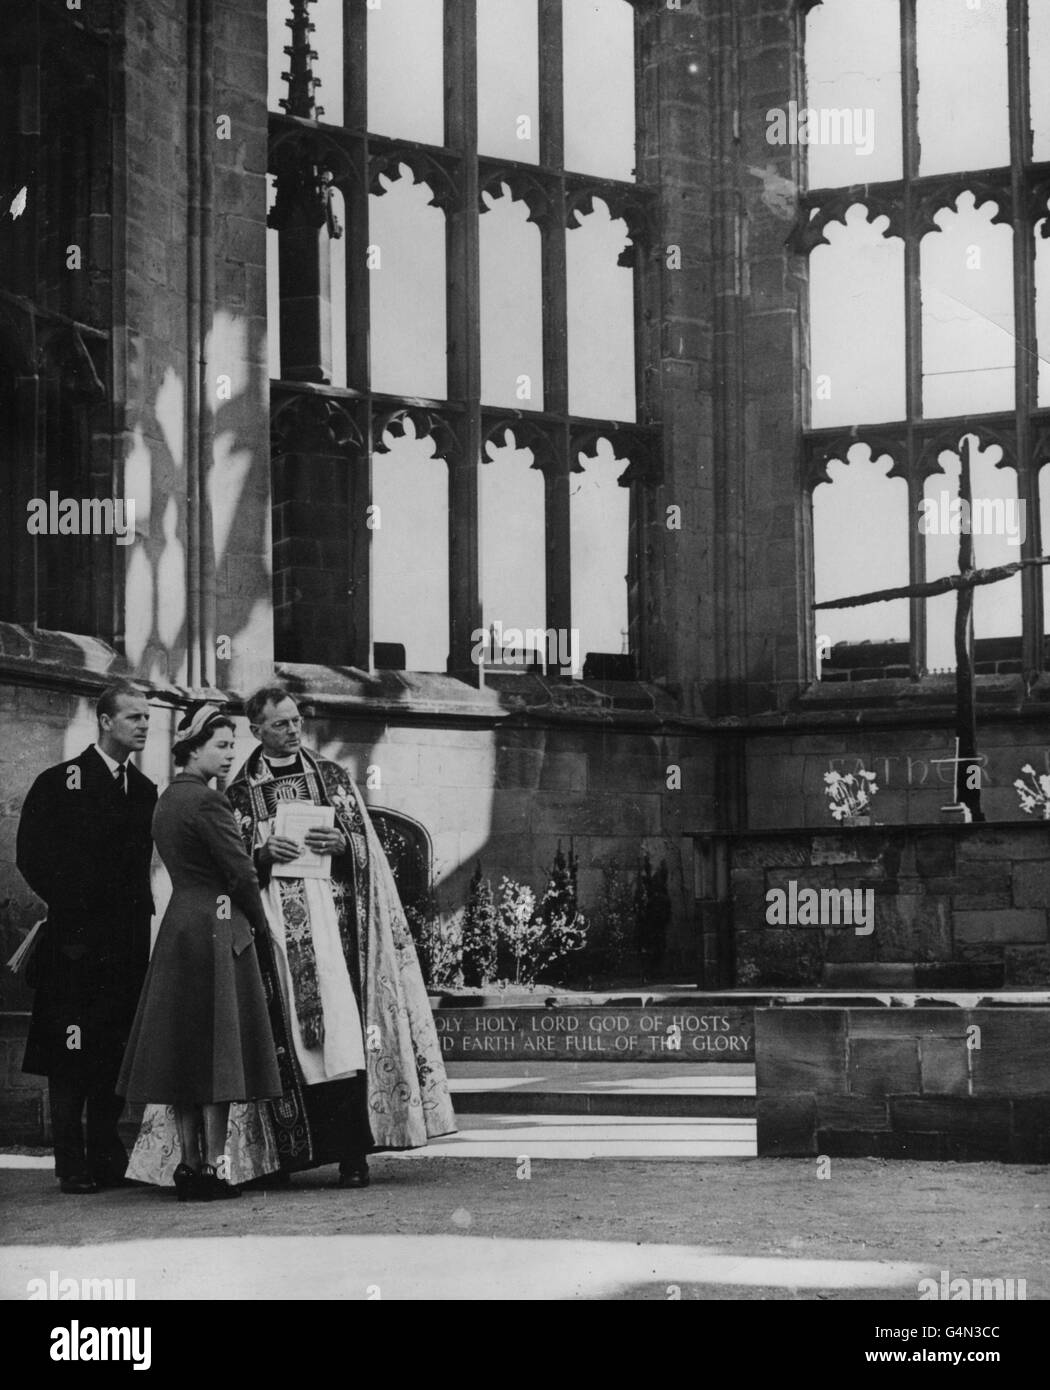 Queen Elizabeth II and the Duke of Edinburgh with the Provost of Coventry, the Very Rev. R.T Howard, at the Sanctuary of the old Coventry Cathedral. They are being shown the charred cross, made from beams of the roof of the Cathedral after it was destroyed by German bombers on the night of November 14, 1940. Stock Photo